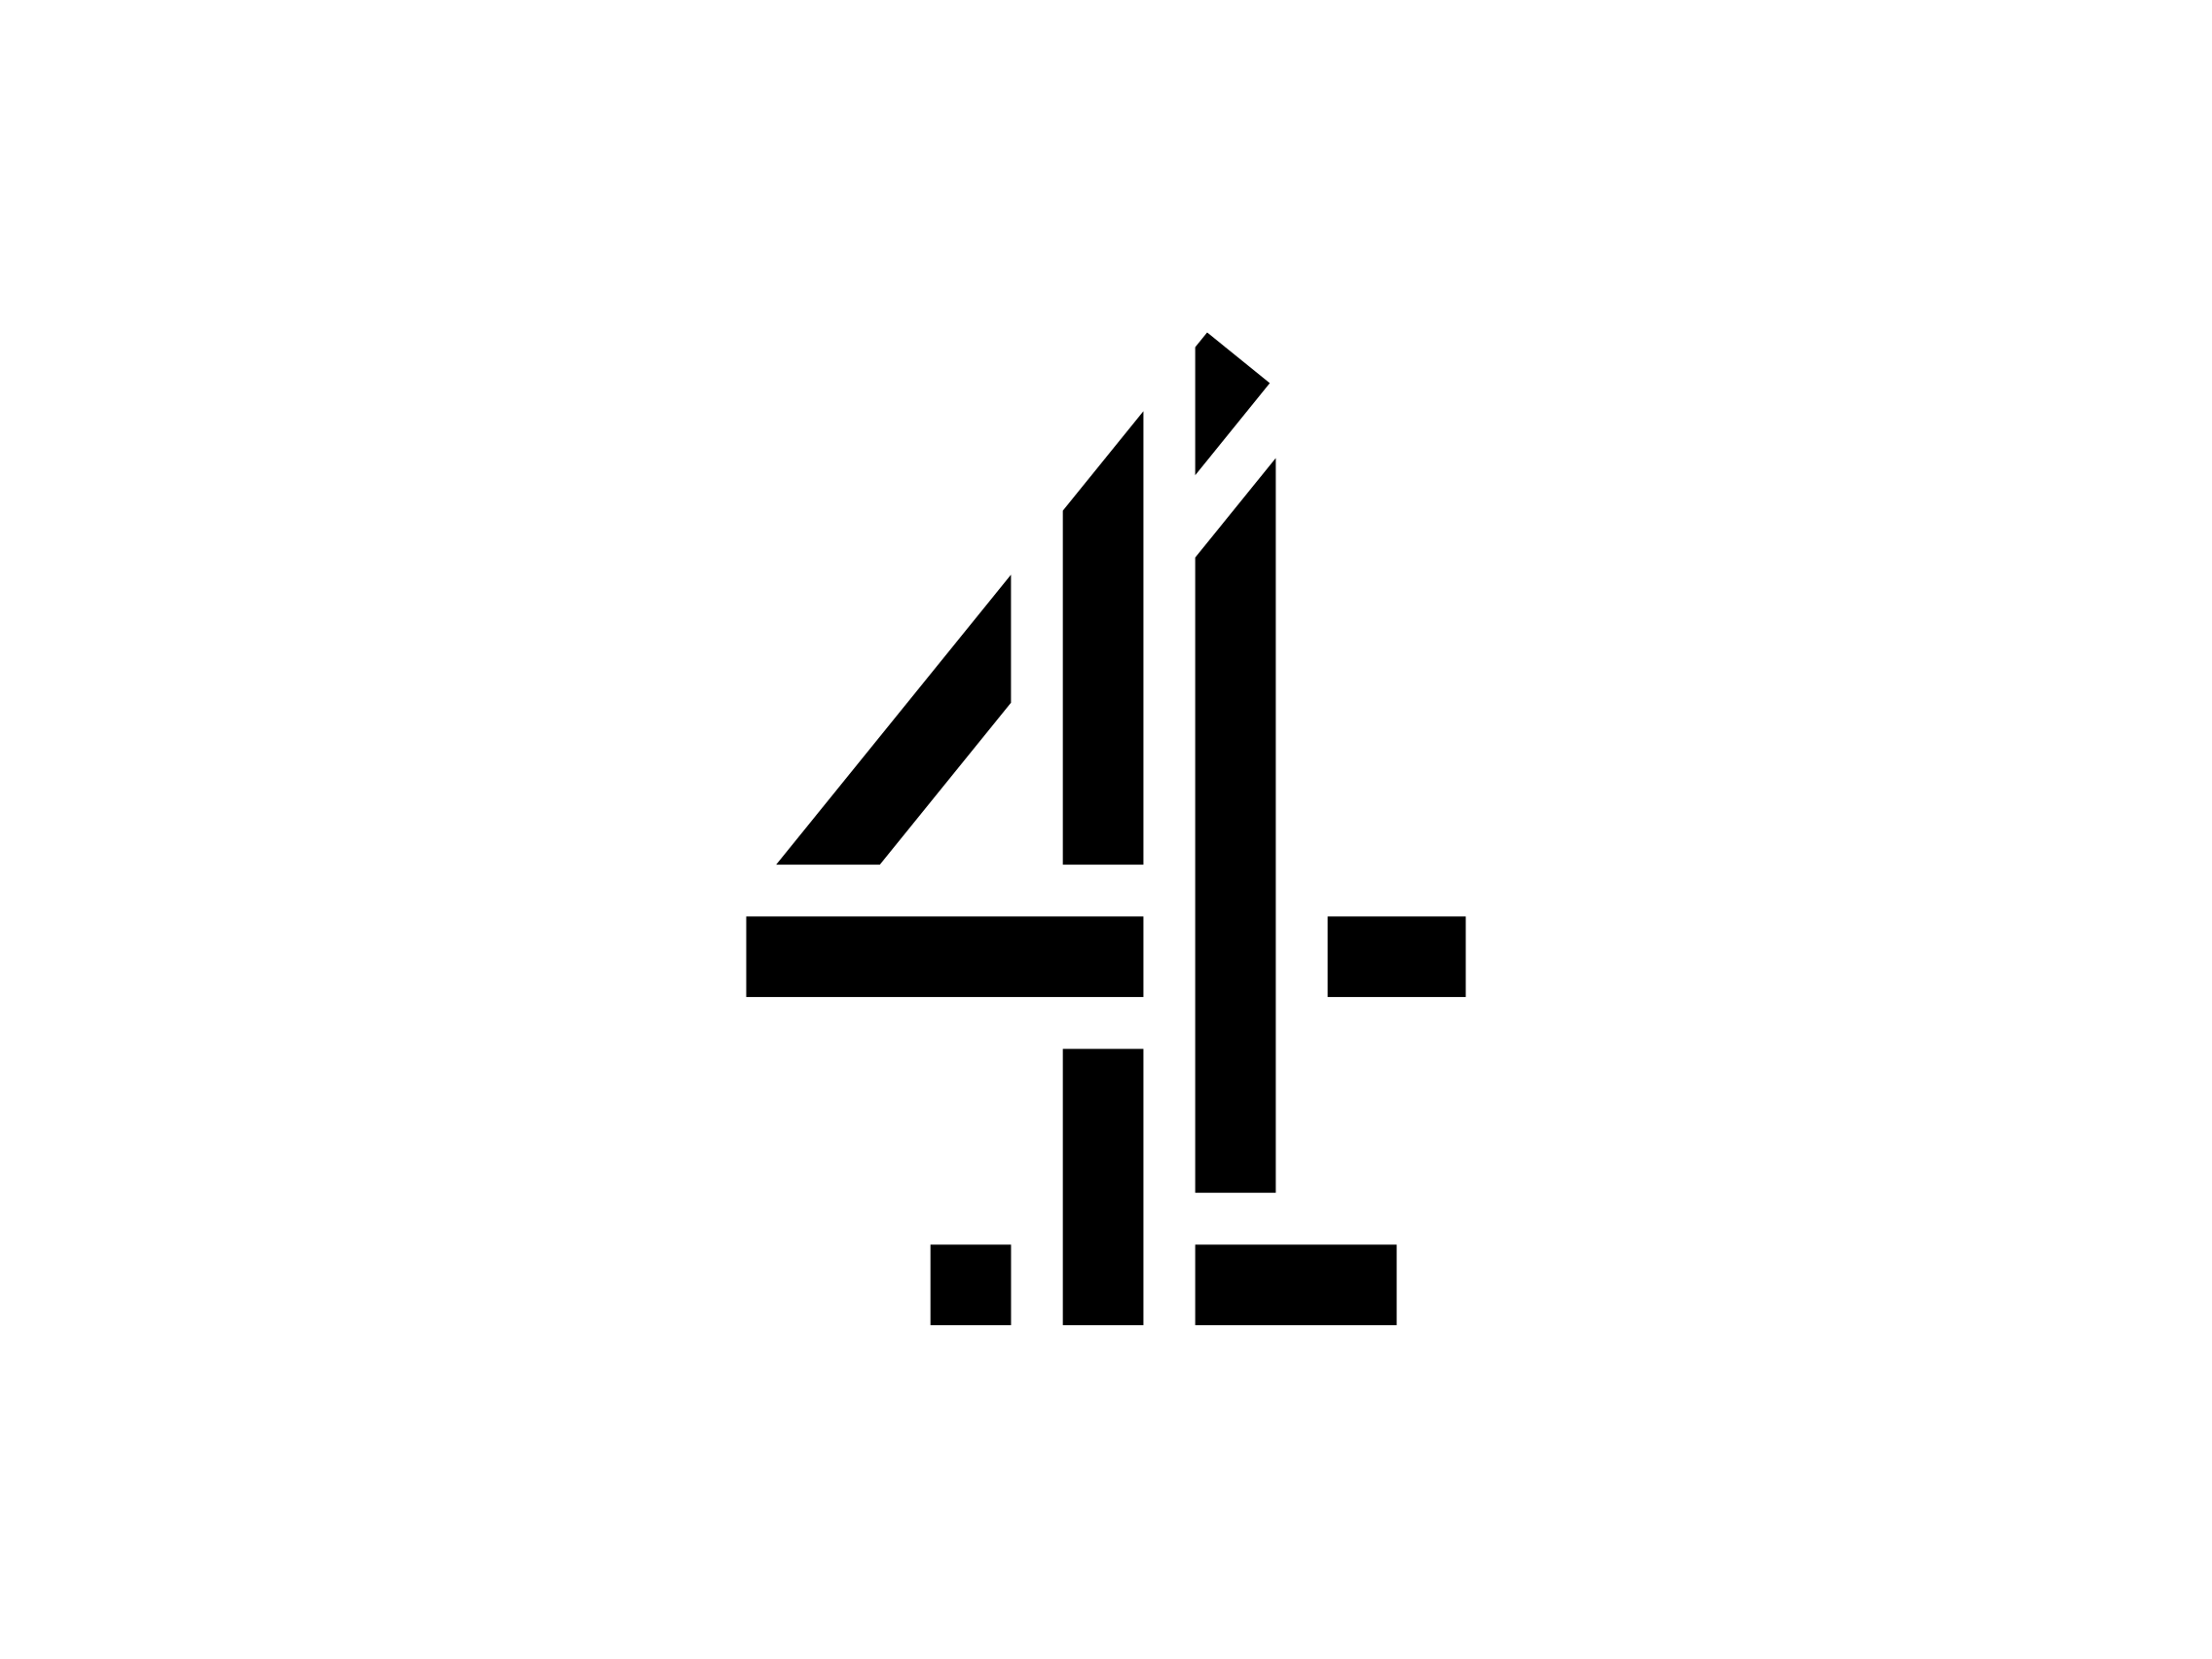 Channel 4 Logo - Channel 4 Logo 2015. Aspiring Solicitors Careers Diversity Advice